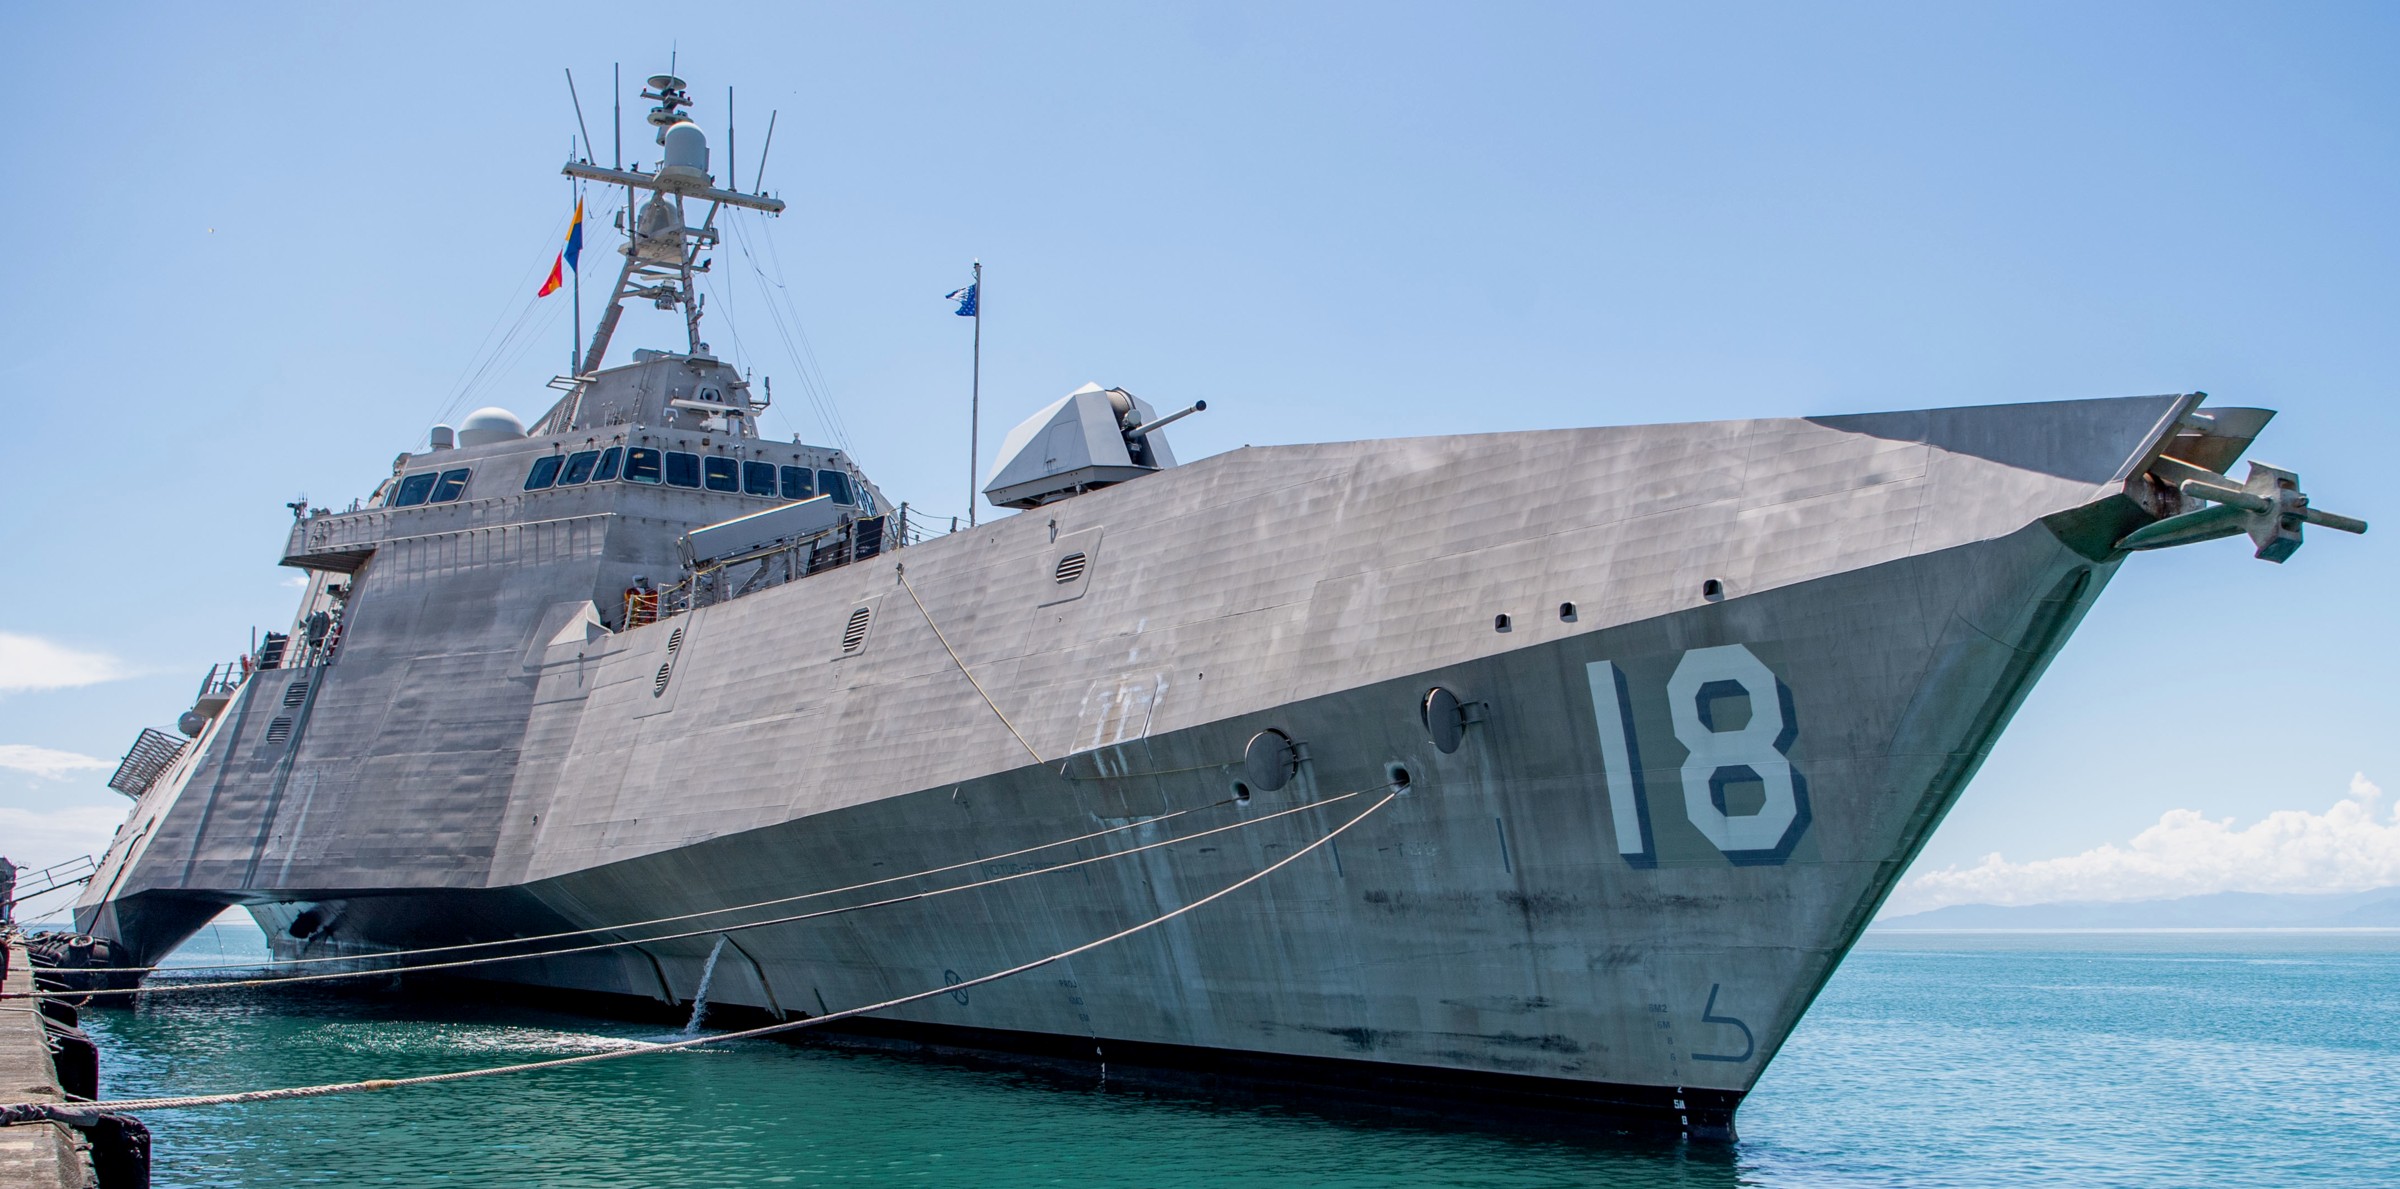 lcs-18 uss charleston independence class littoral combat ship us navy port lae papua new guinea 61